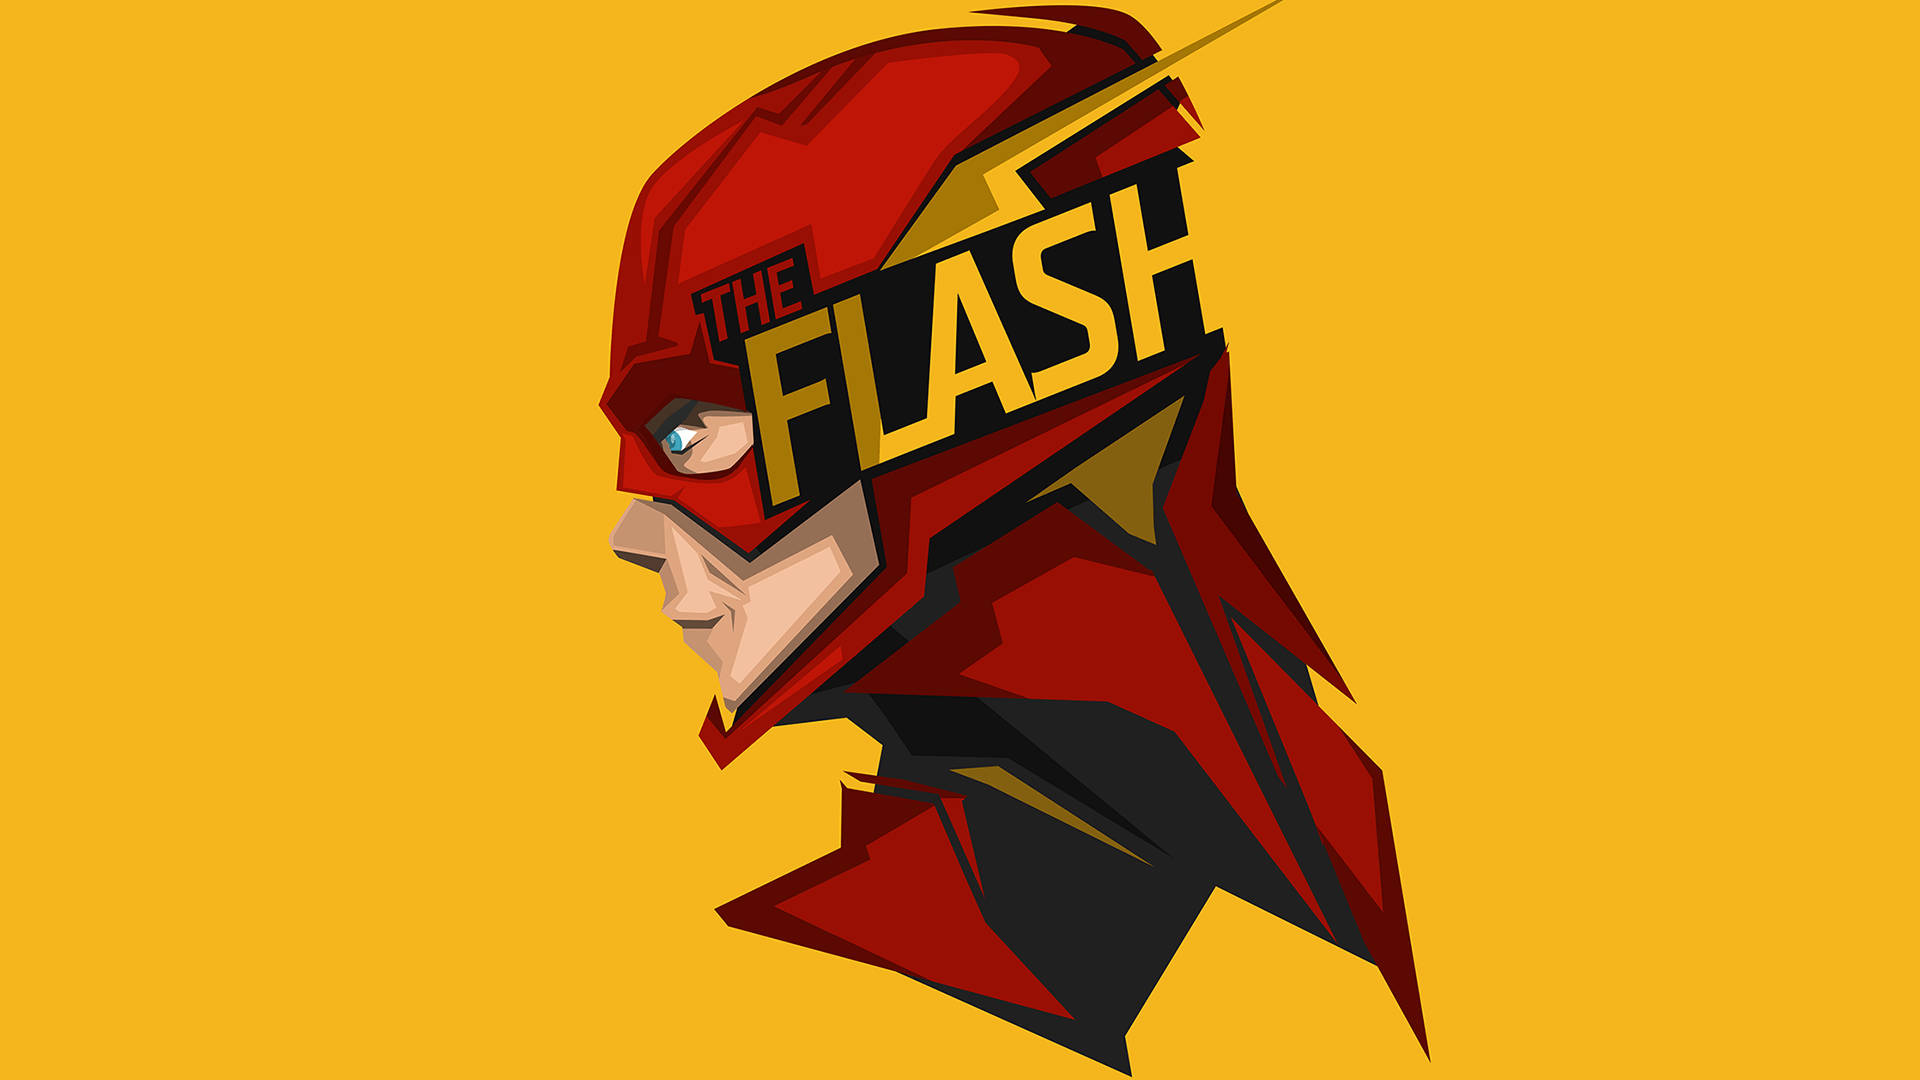 Barry Allen, Dressed in Yellow and Red Outfit, is the Superhero of The Flash Wallpaper